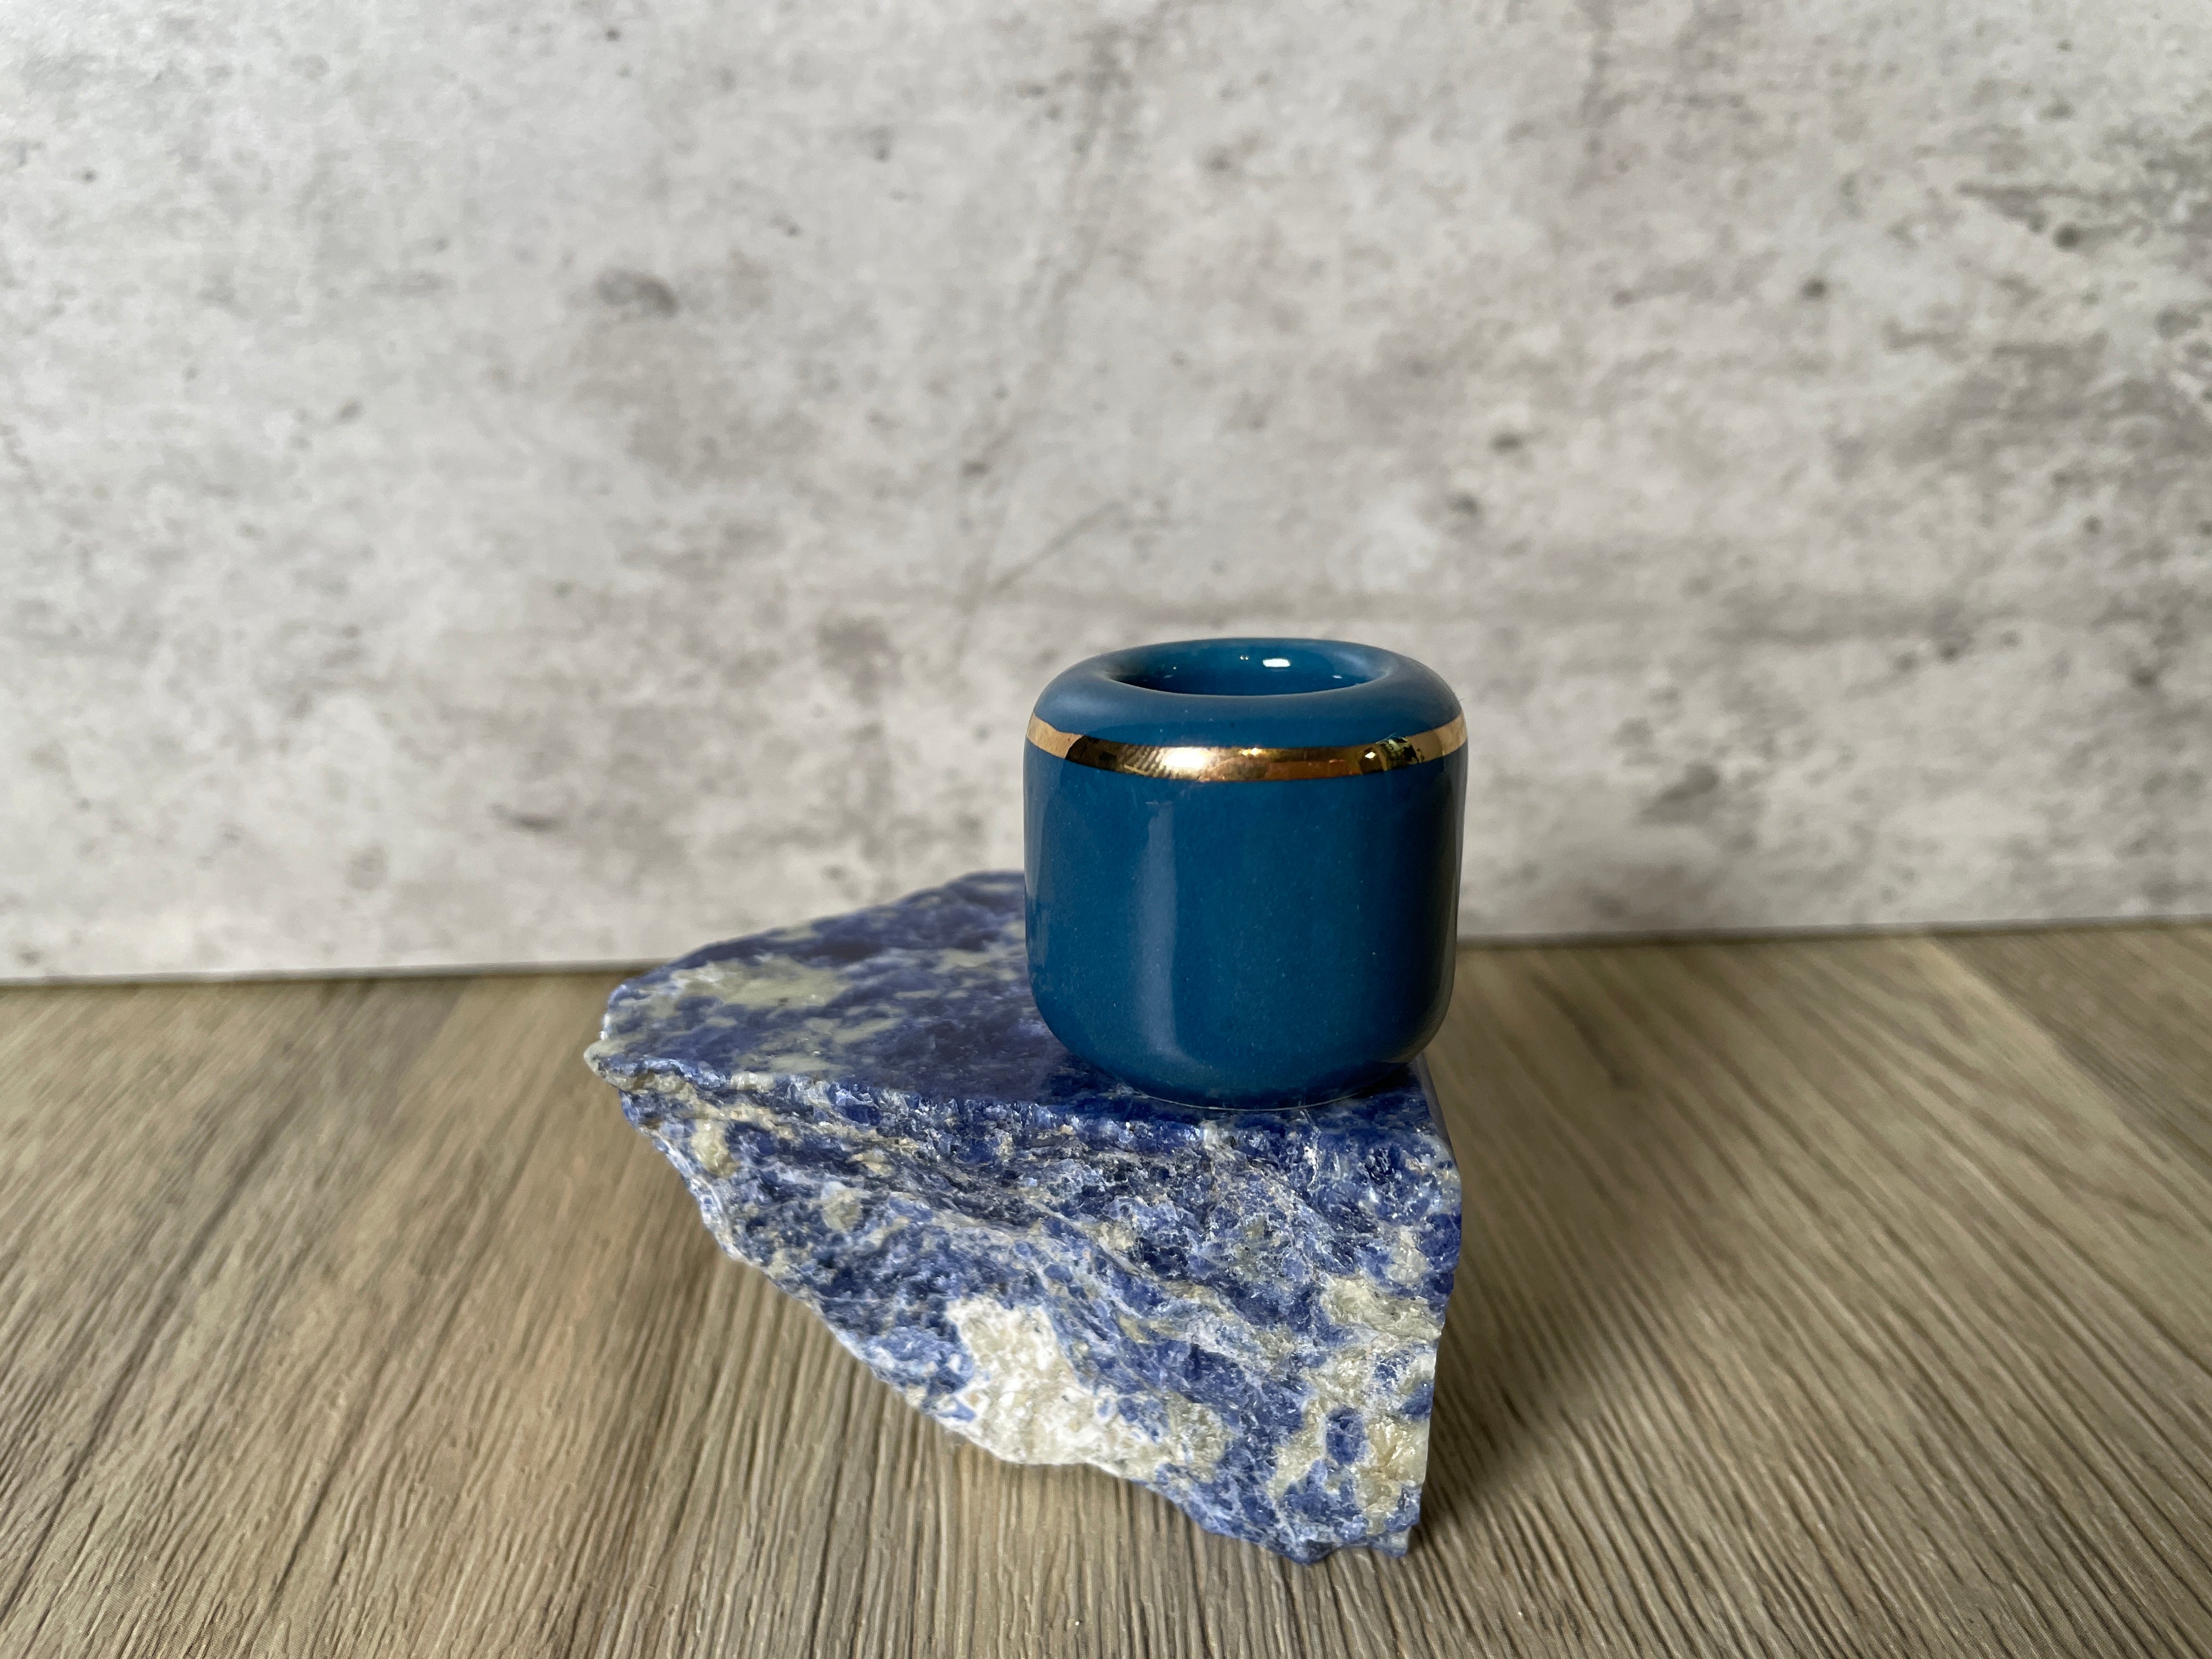 Buy Online Latest and Unique Blue Chime Candle Holder - Ceramic with Gold Band | Shop Best Spiritual Items - The Mystical Ritual